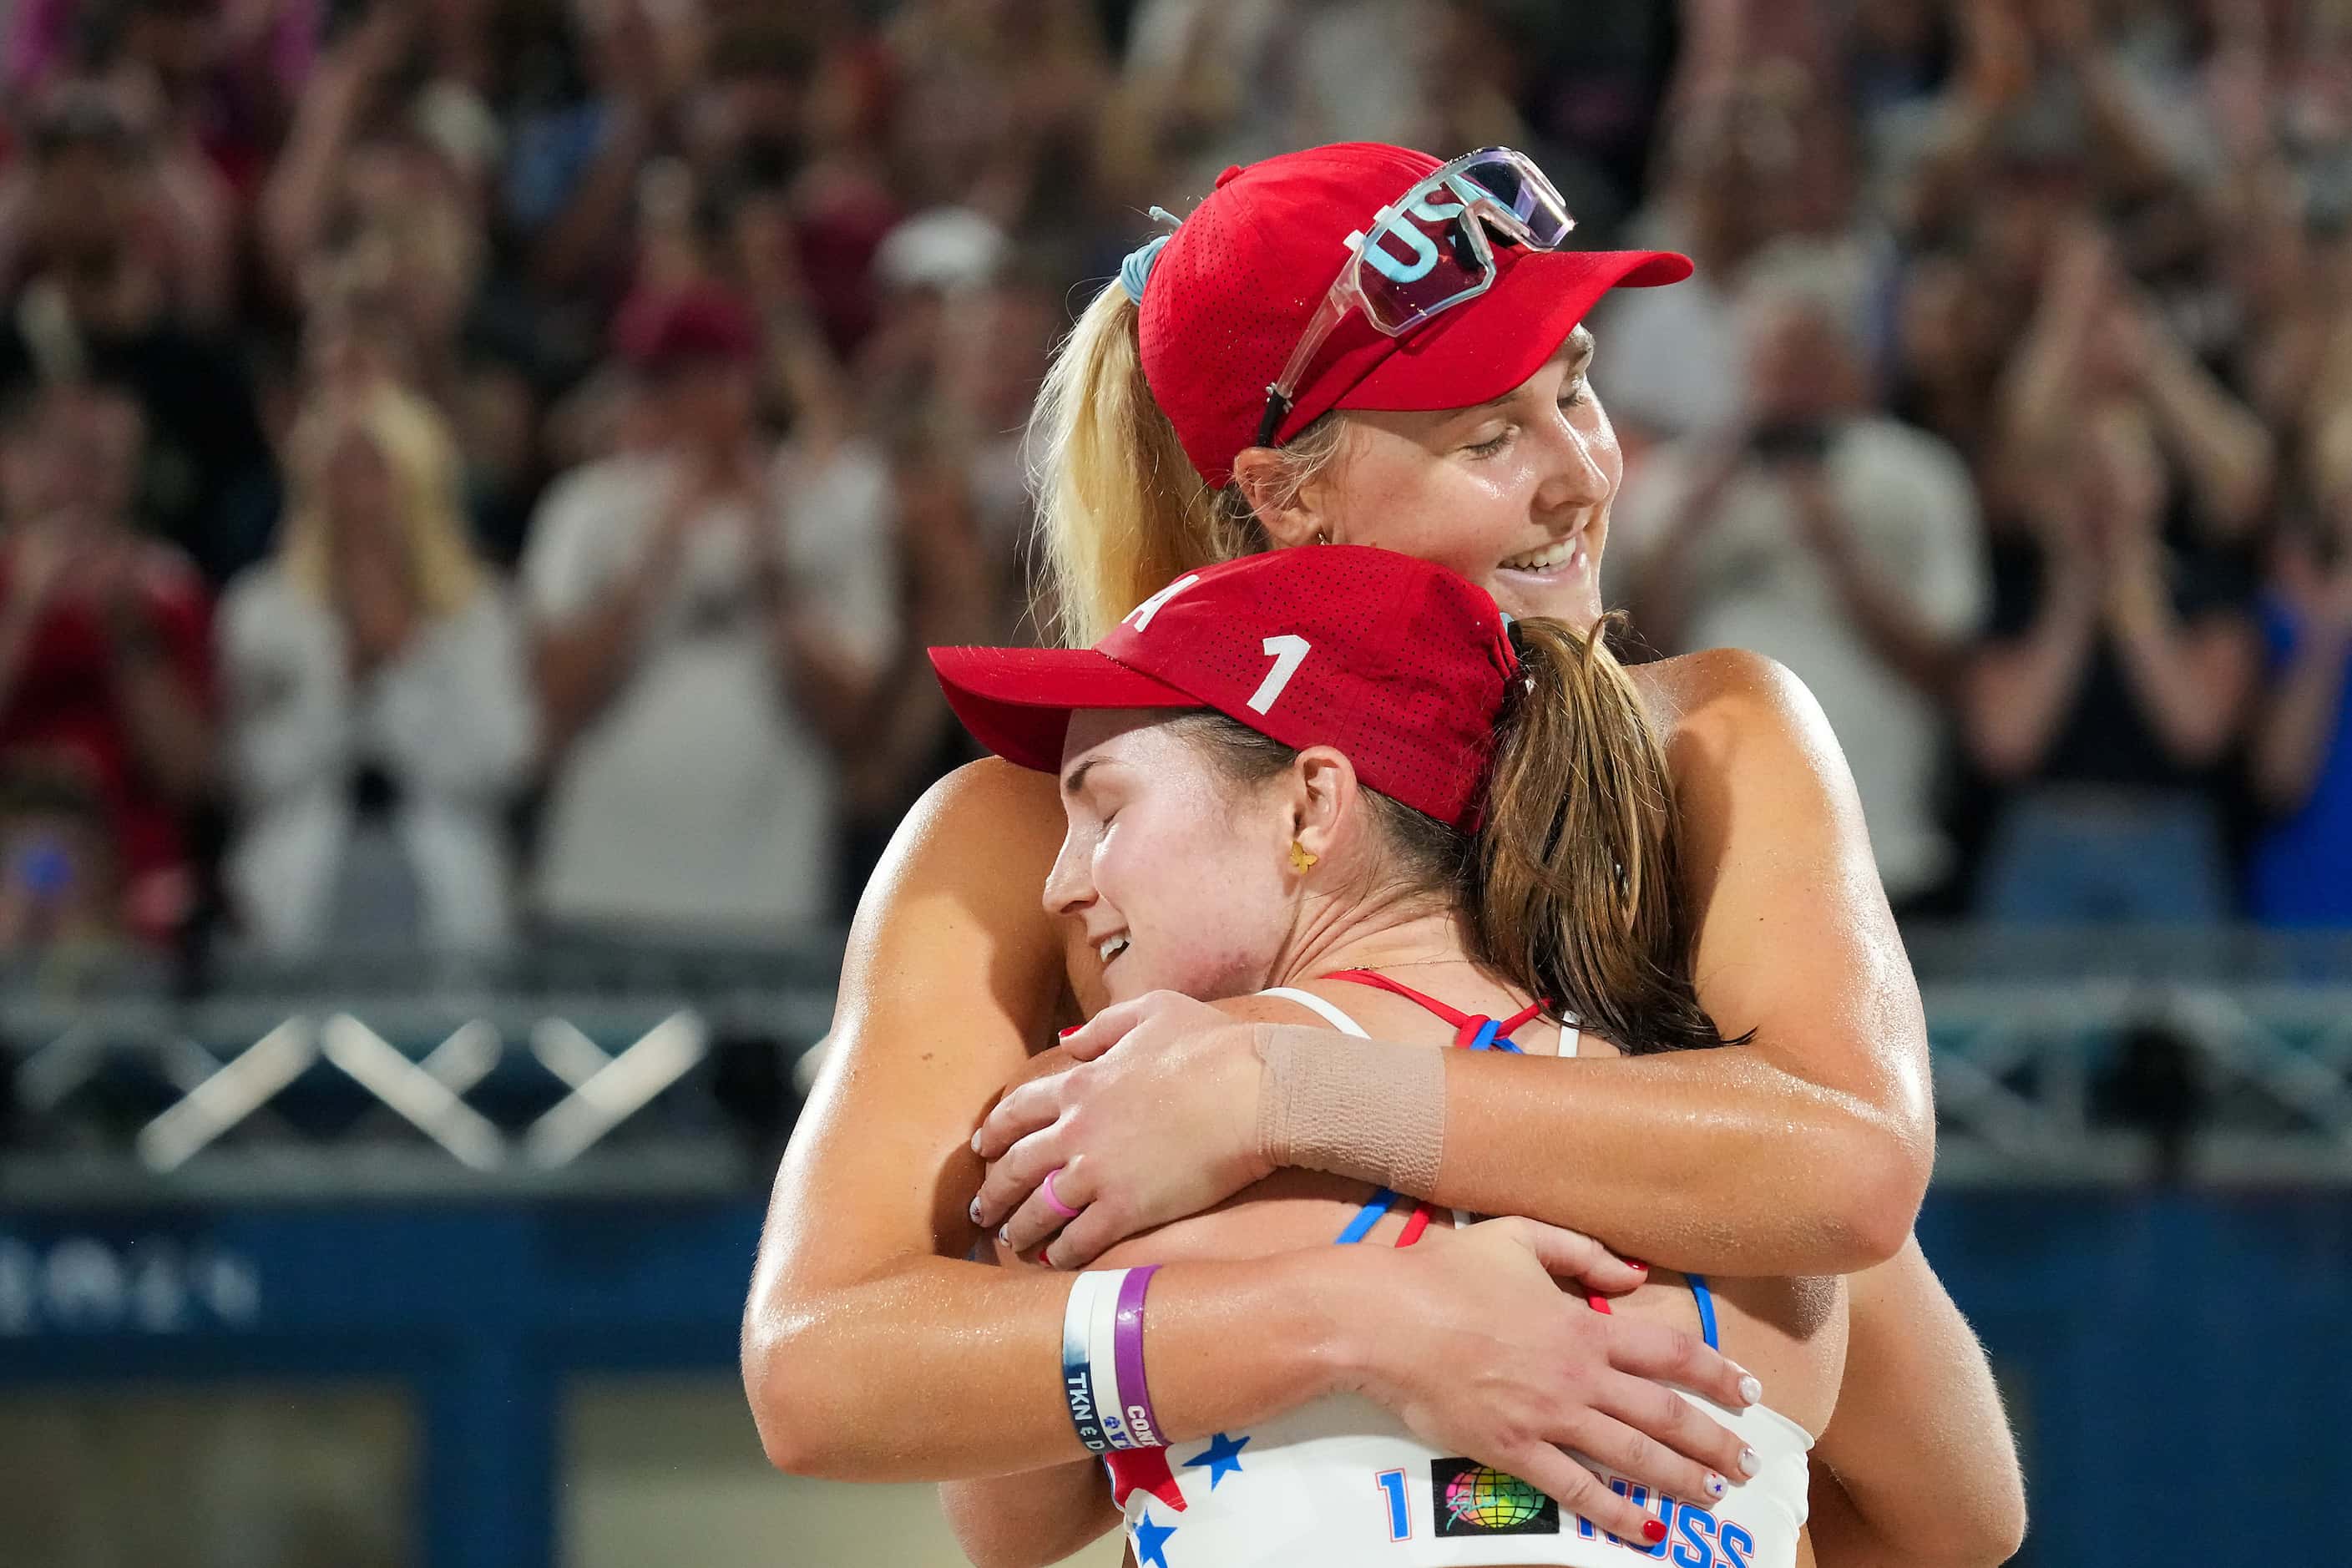 Taryn Kloth (facing) celebrates with Kristen Nuss after a victory over Artacho del Solar and...